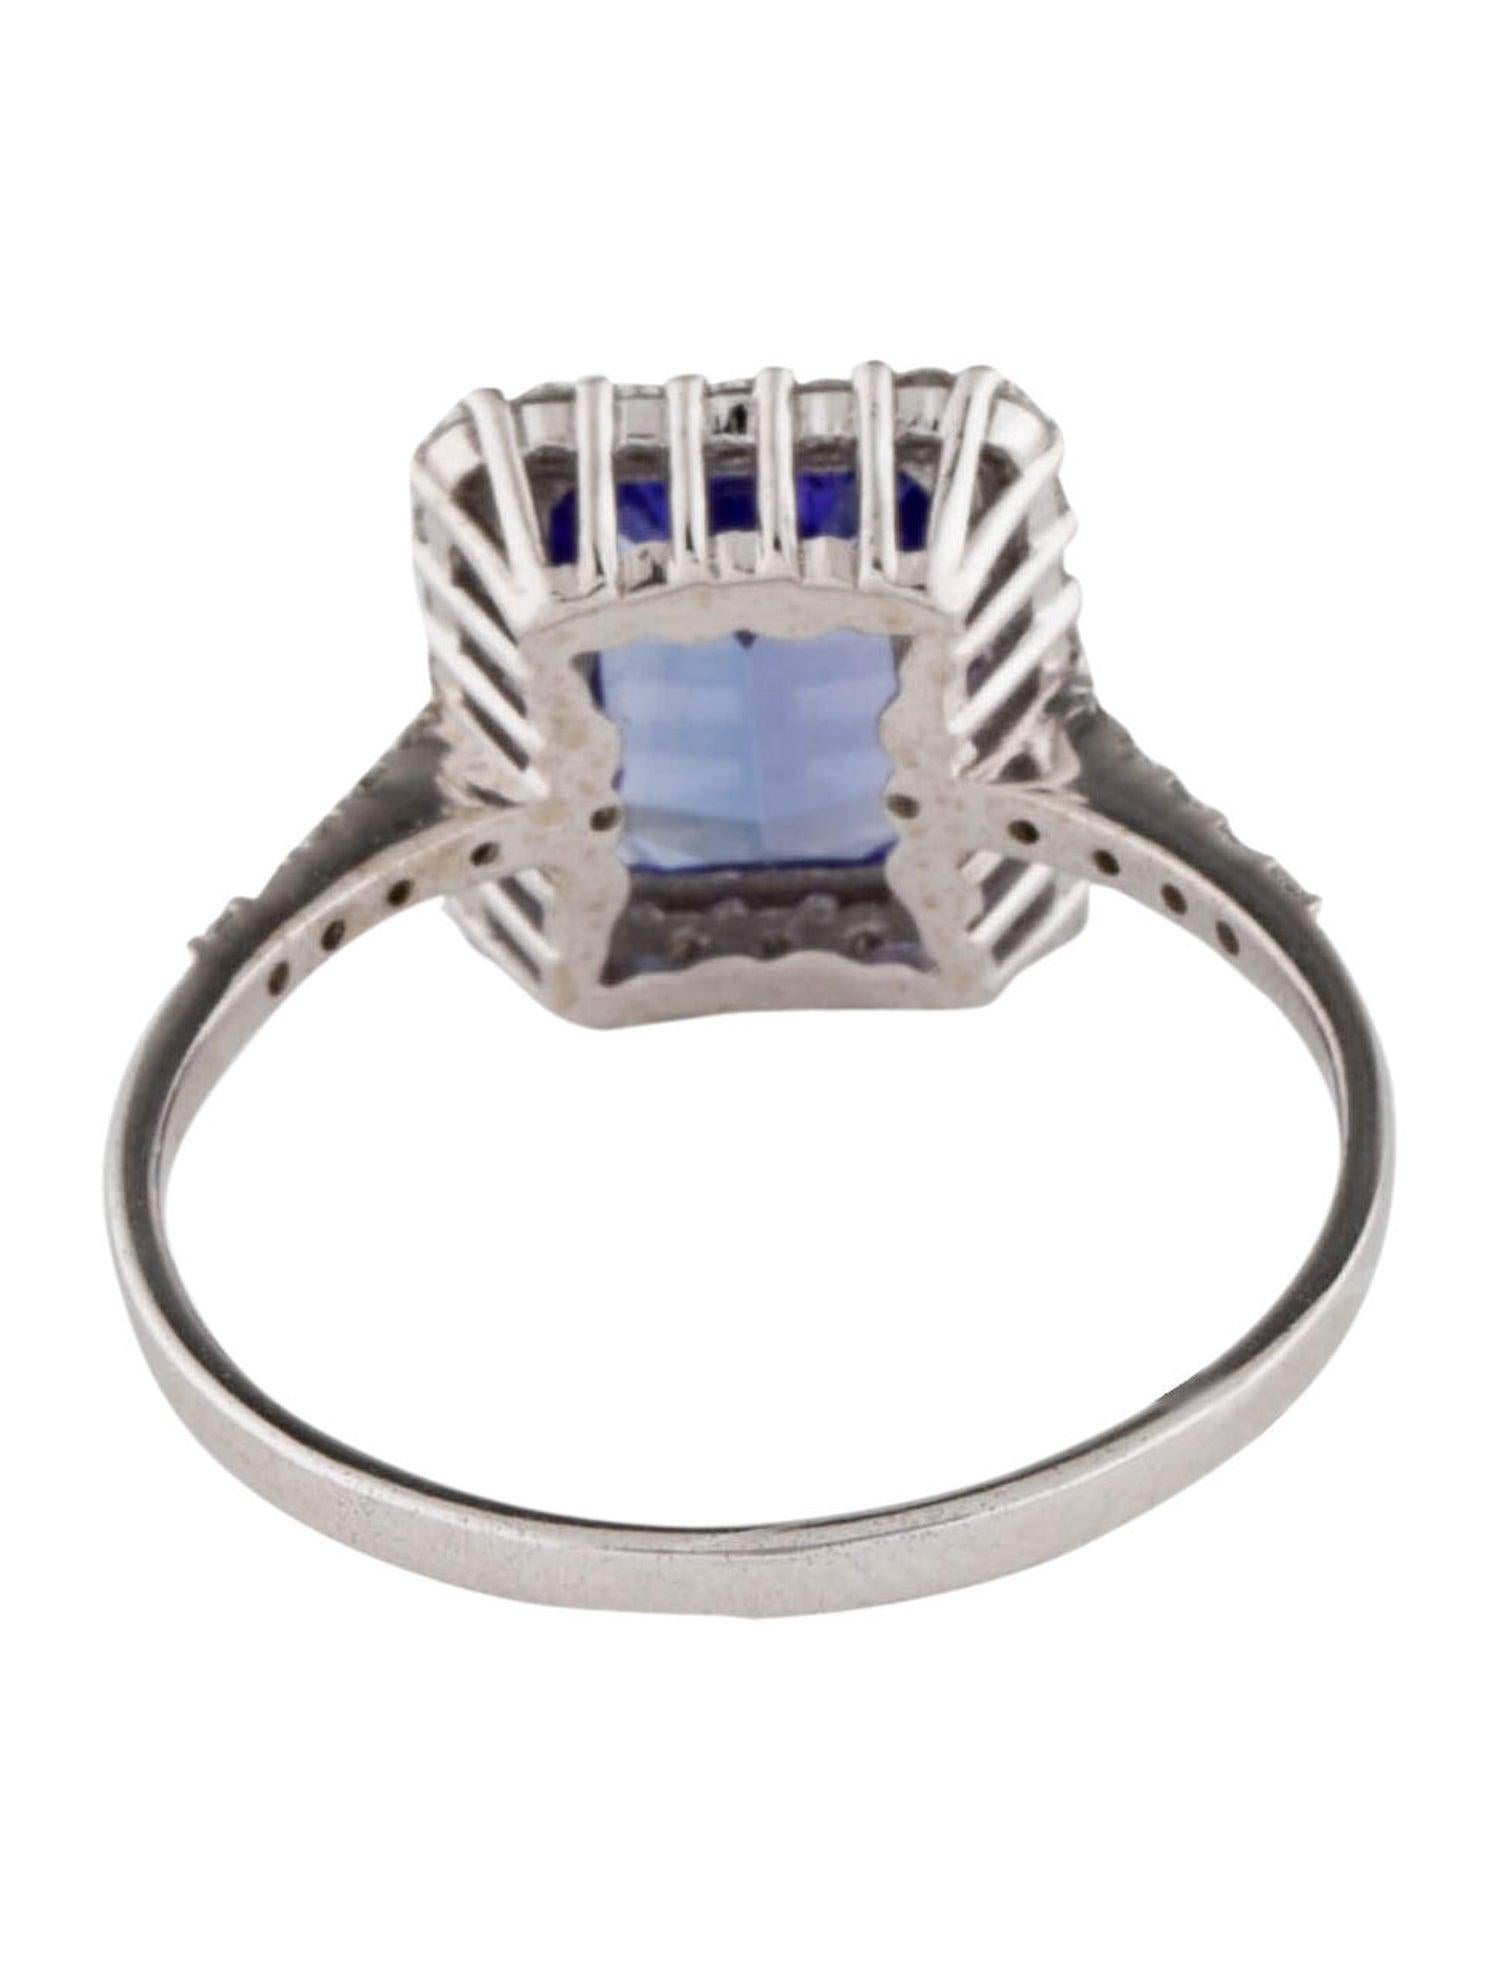 Elegant 14K White Gold Tanzanite & Diamond Cocktail Ring, Rectangular Step Cut In New Condition For Sale In Holtsville, NY